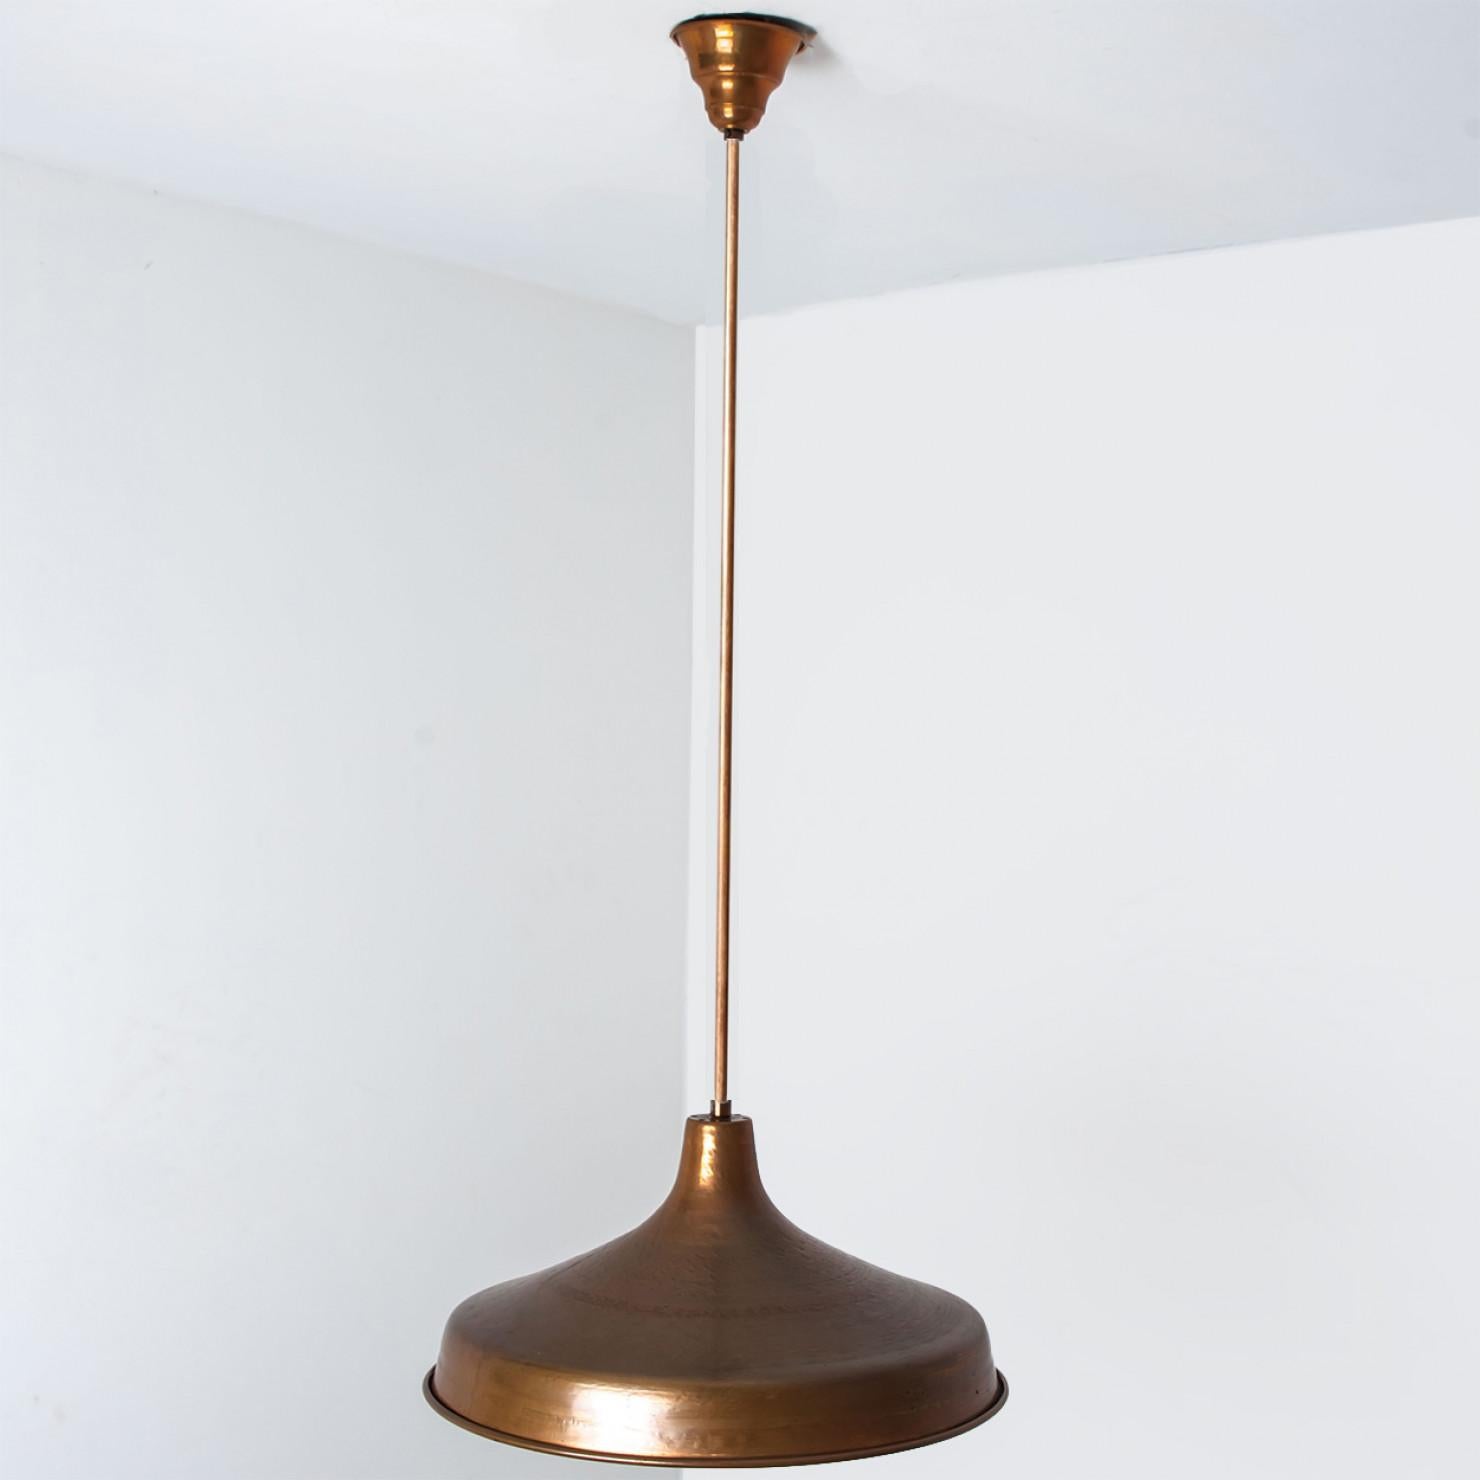 This pair of beautiful copper lamps from the Danmark. A warm and used color of copper.

Dimensions model: Diameter 19.68 inch/50 cm Height 9.84/25 cm.

Each light requires 1X E27 Light bulb.

